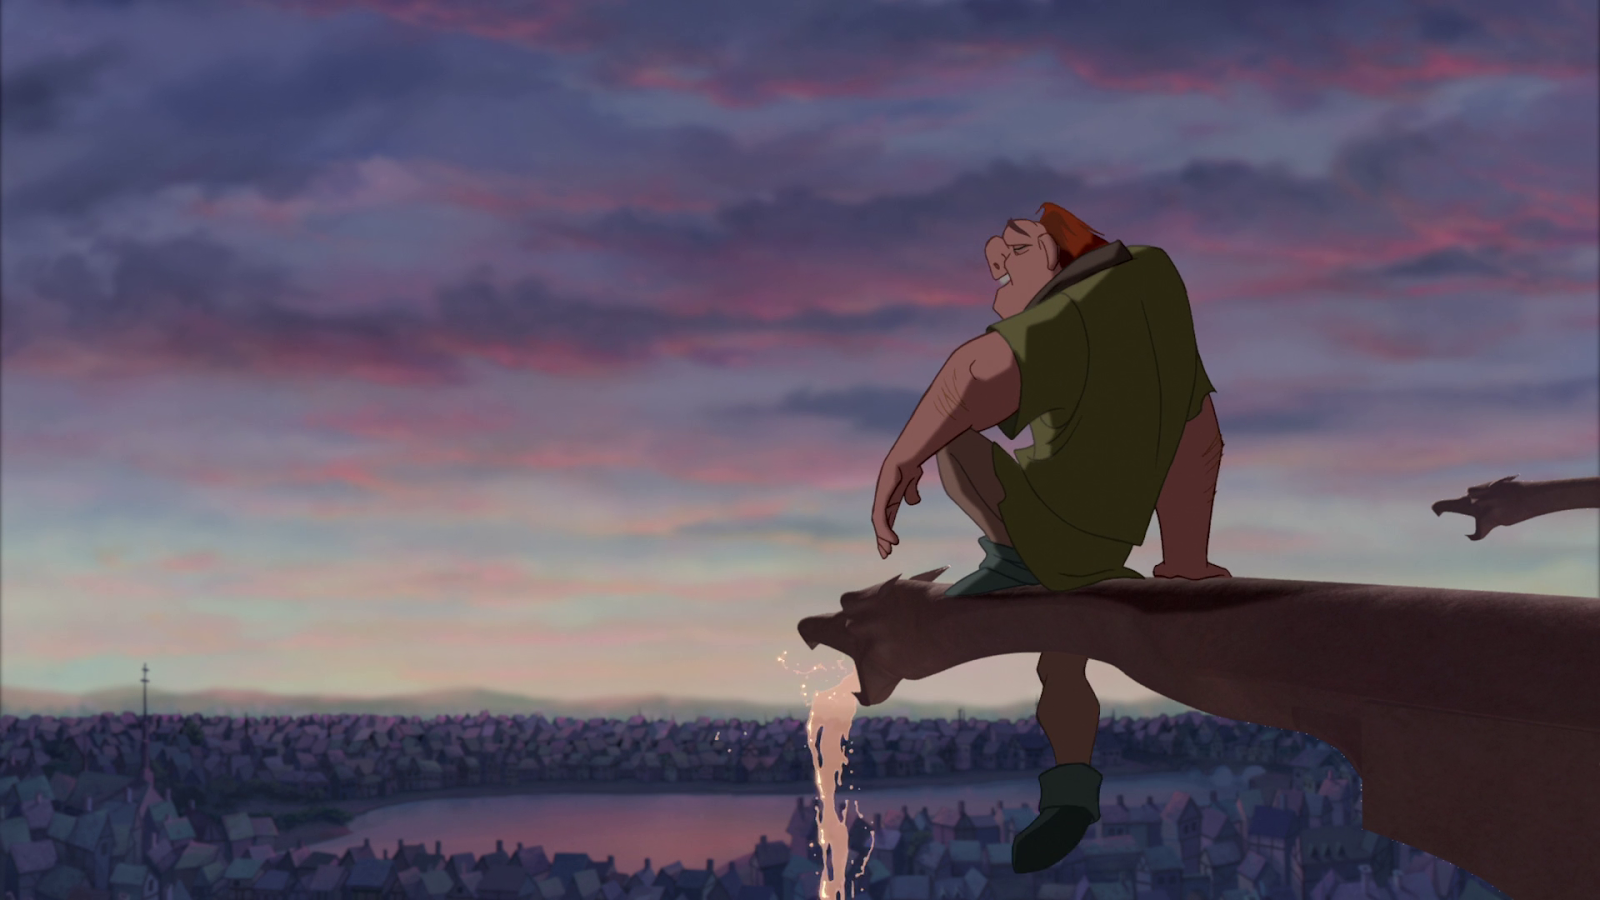 Movie Micah : The Hunchback of Notre Dame (1996) (G)